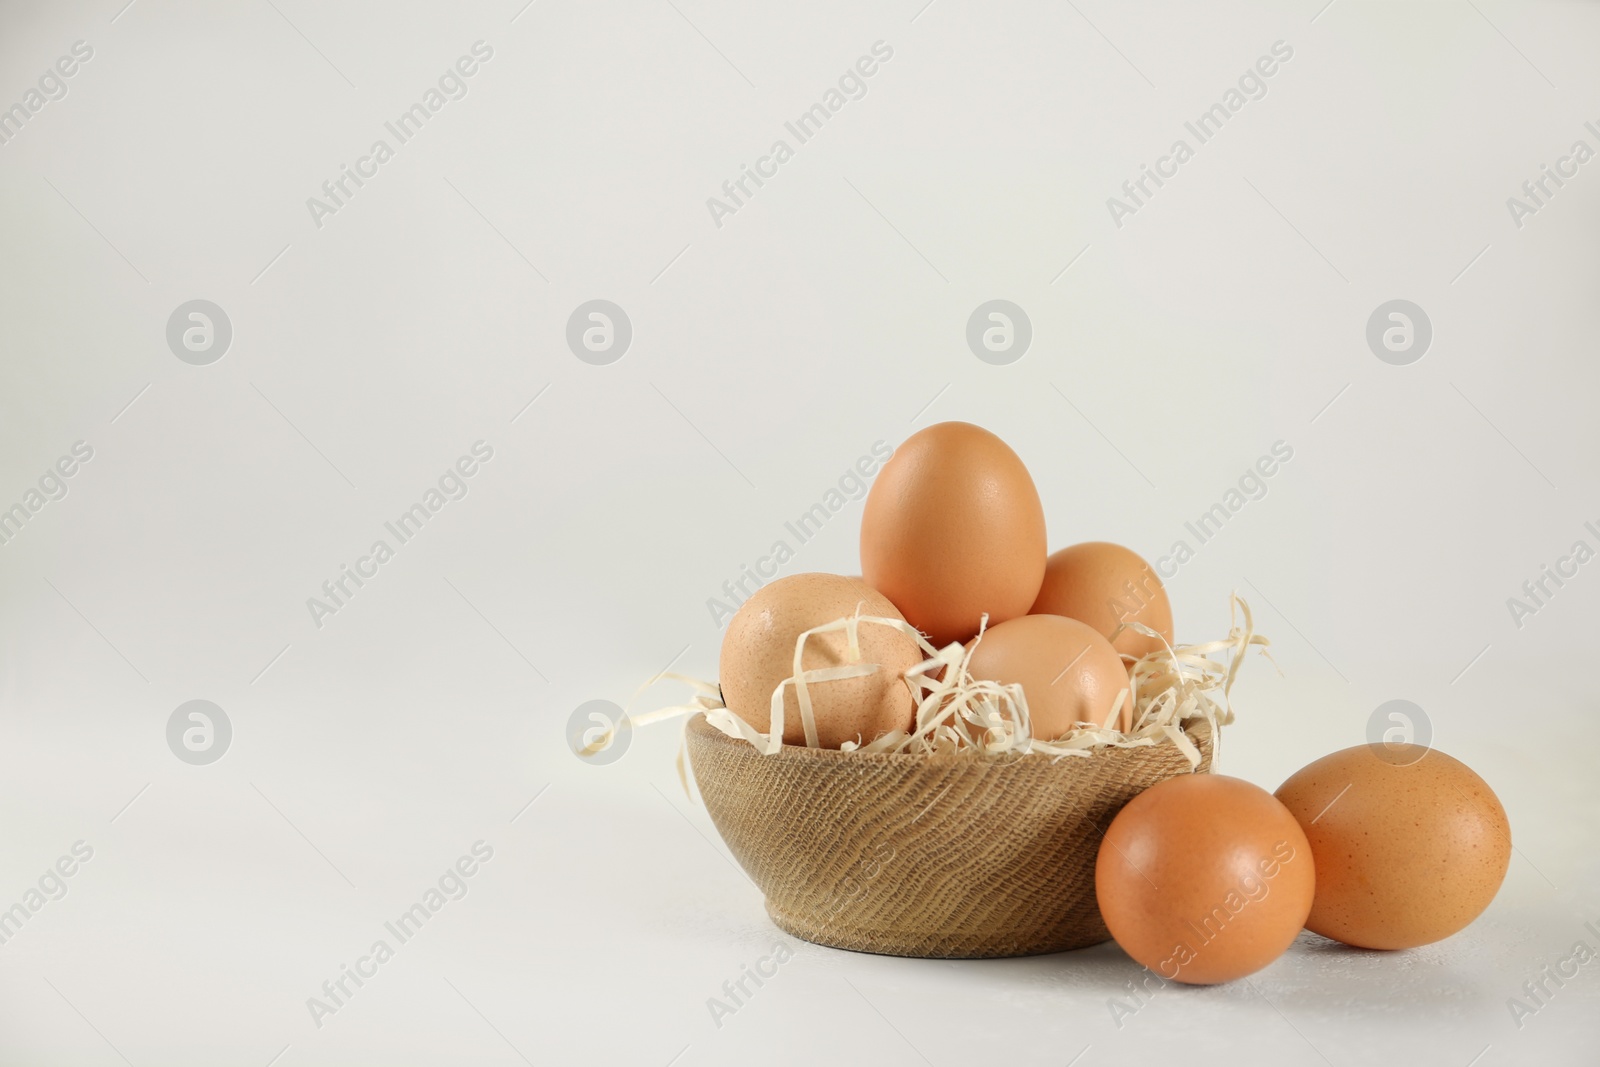 Photo of Raw chicken eggs and decorative straw on white table. Space for text